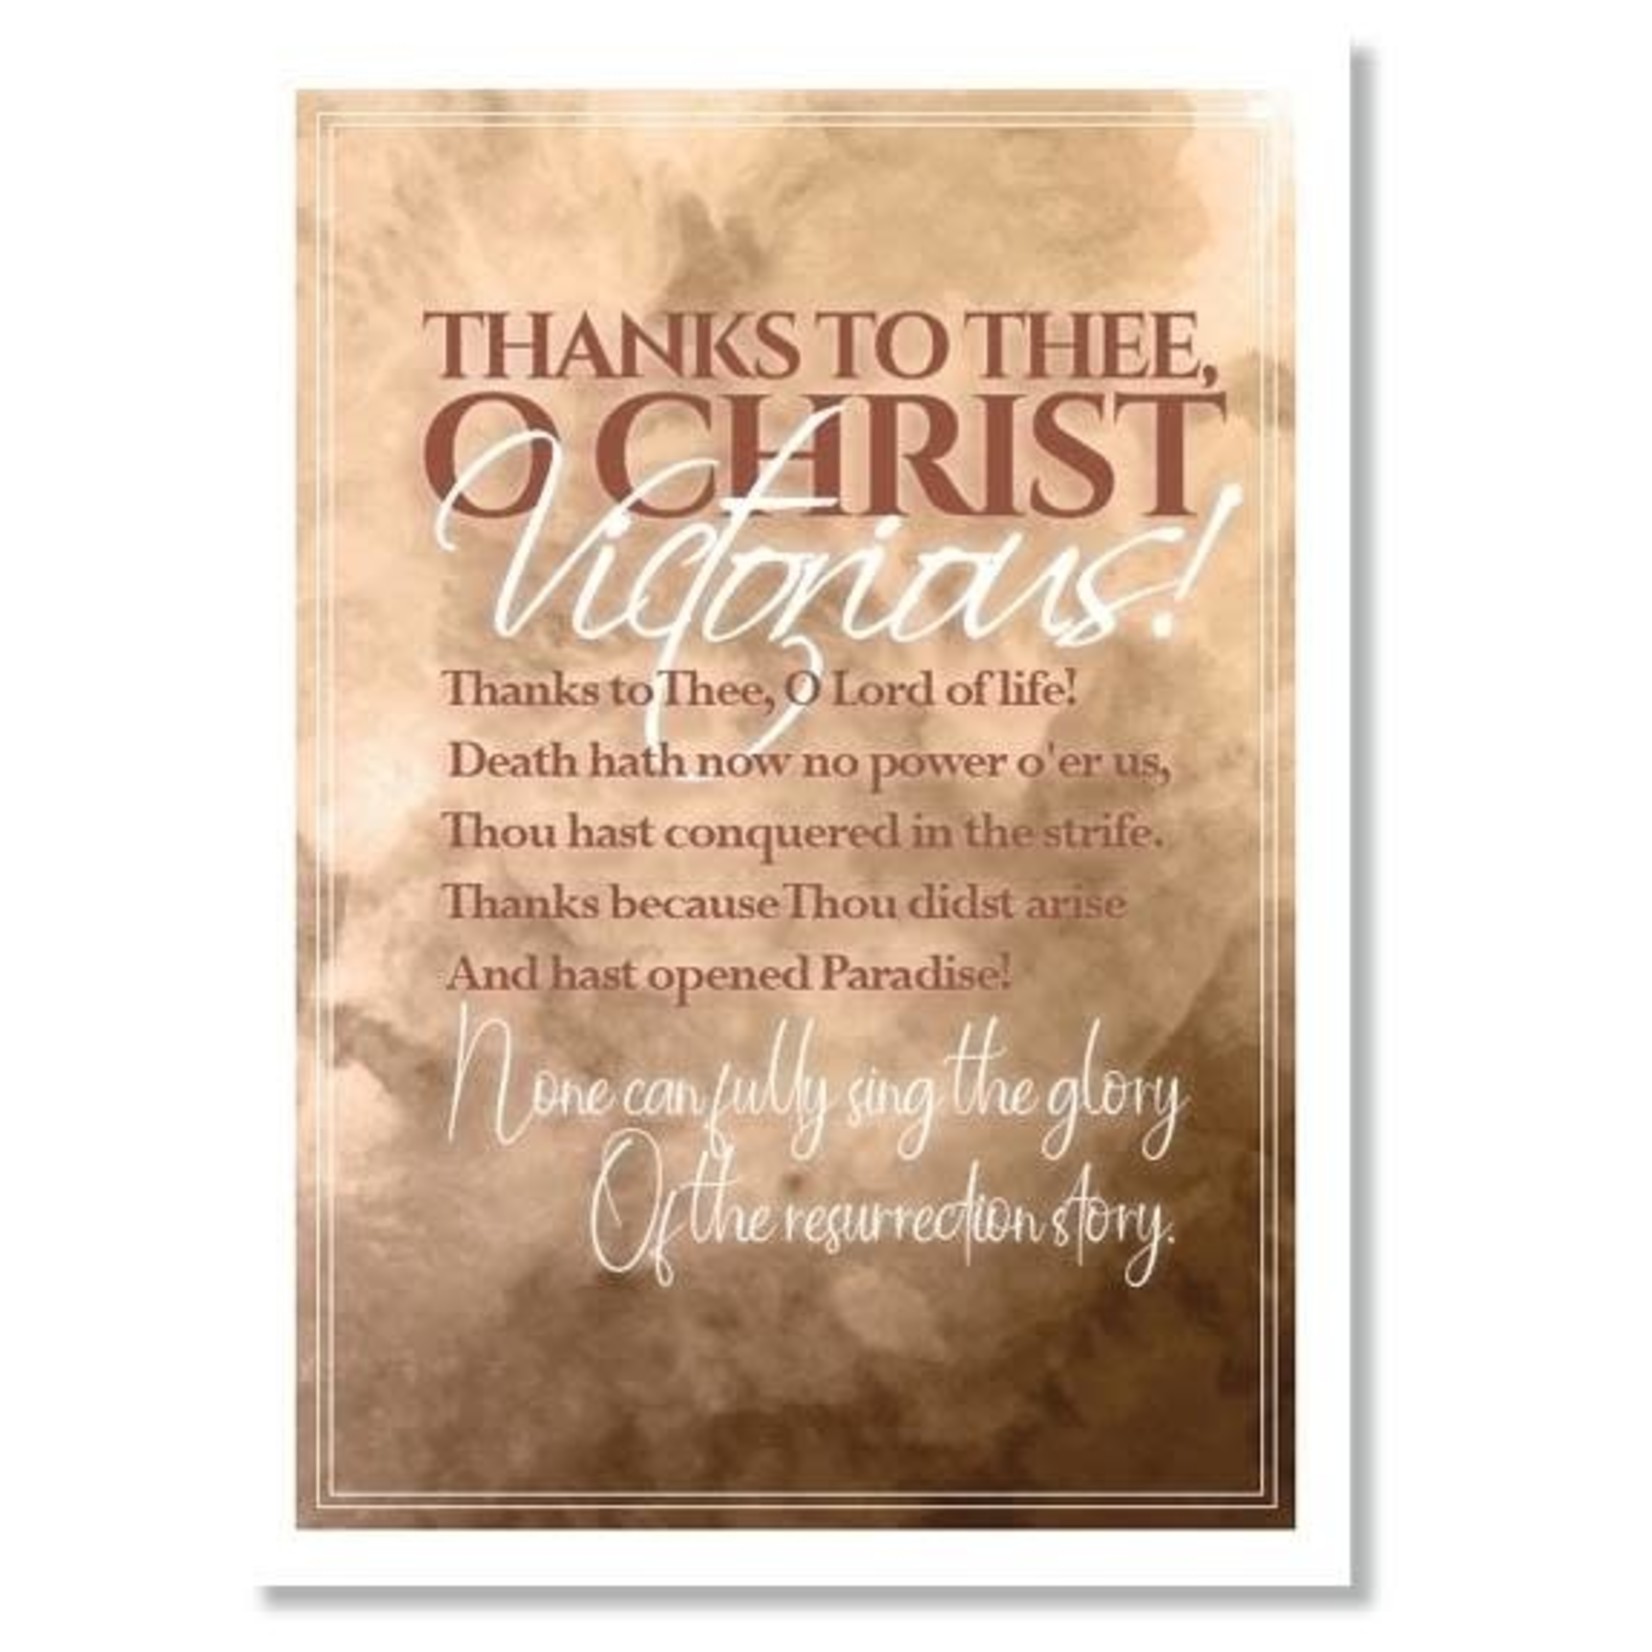 Hymns In My Heart - 5x7" Greeting Card - Sympathy - Thanks to Thee, O Christ